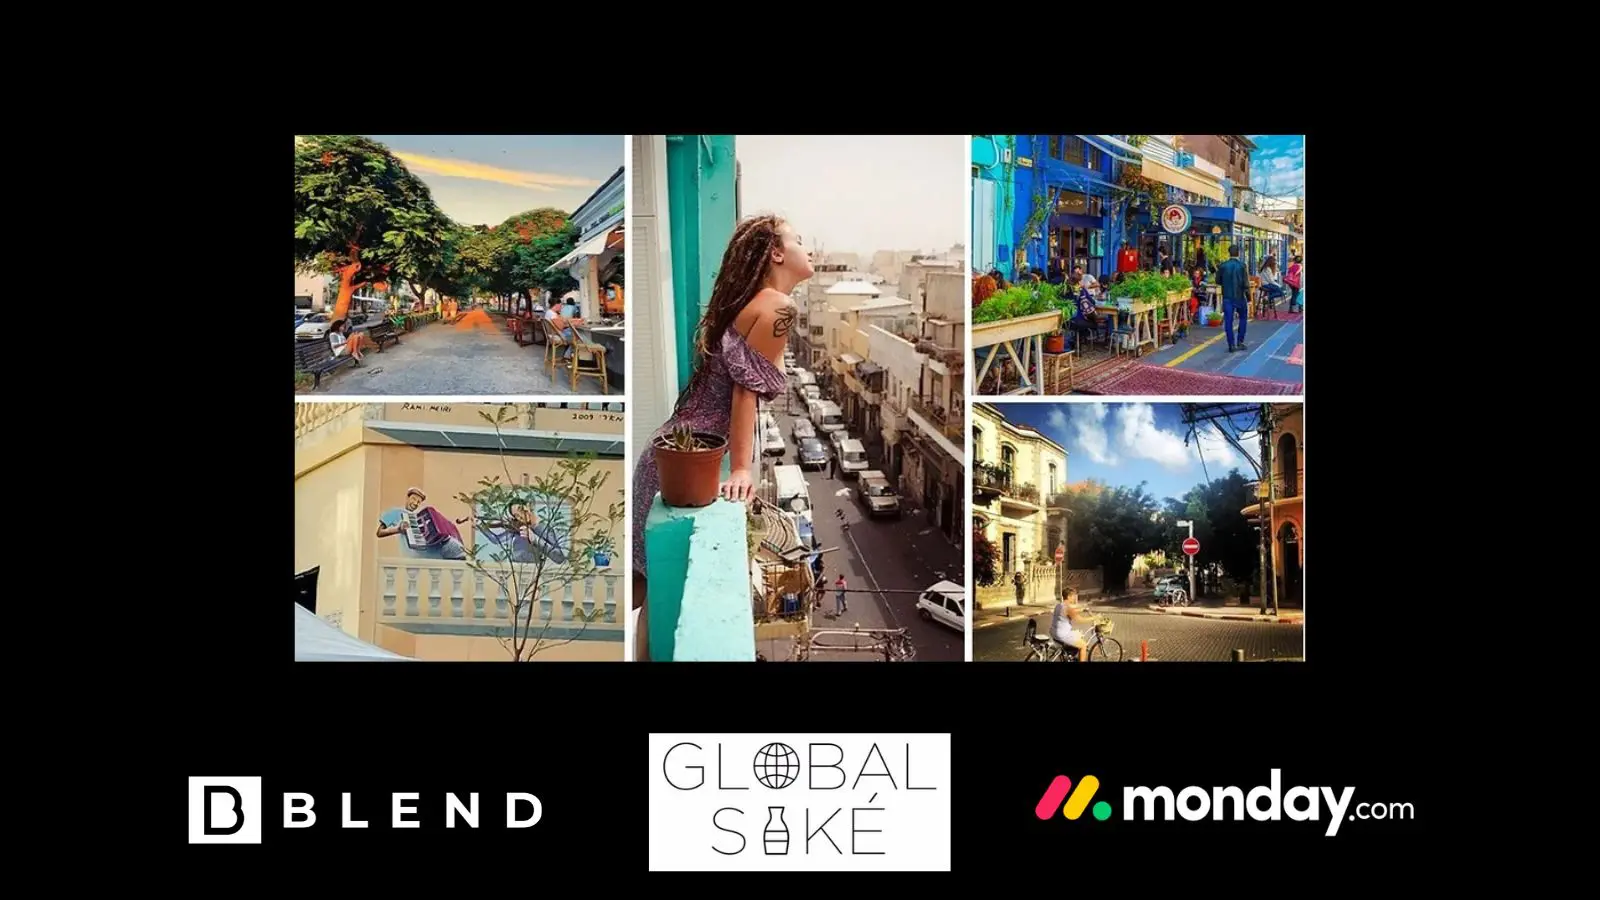 Globalsake’s LocWalk TLV Event to be Hosted by BLEND and Monday.com